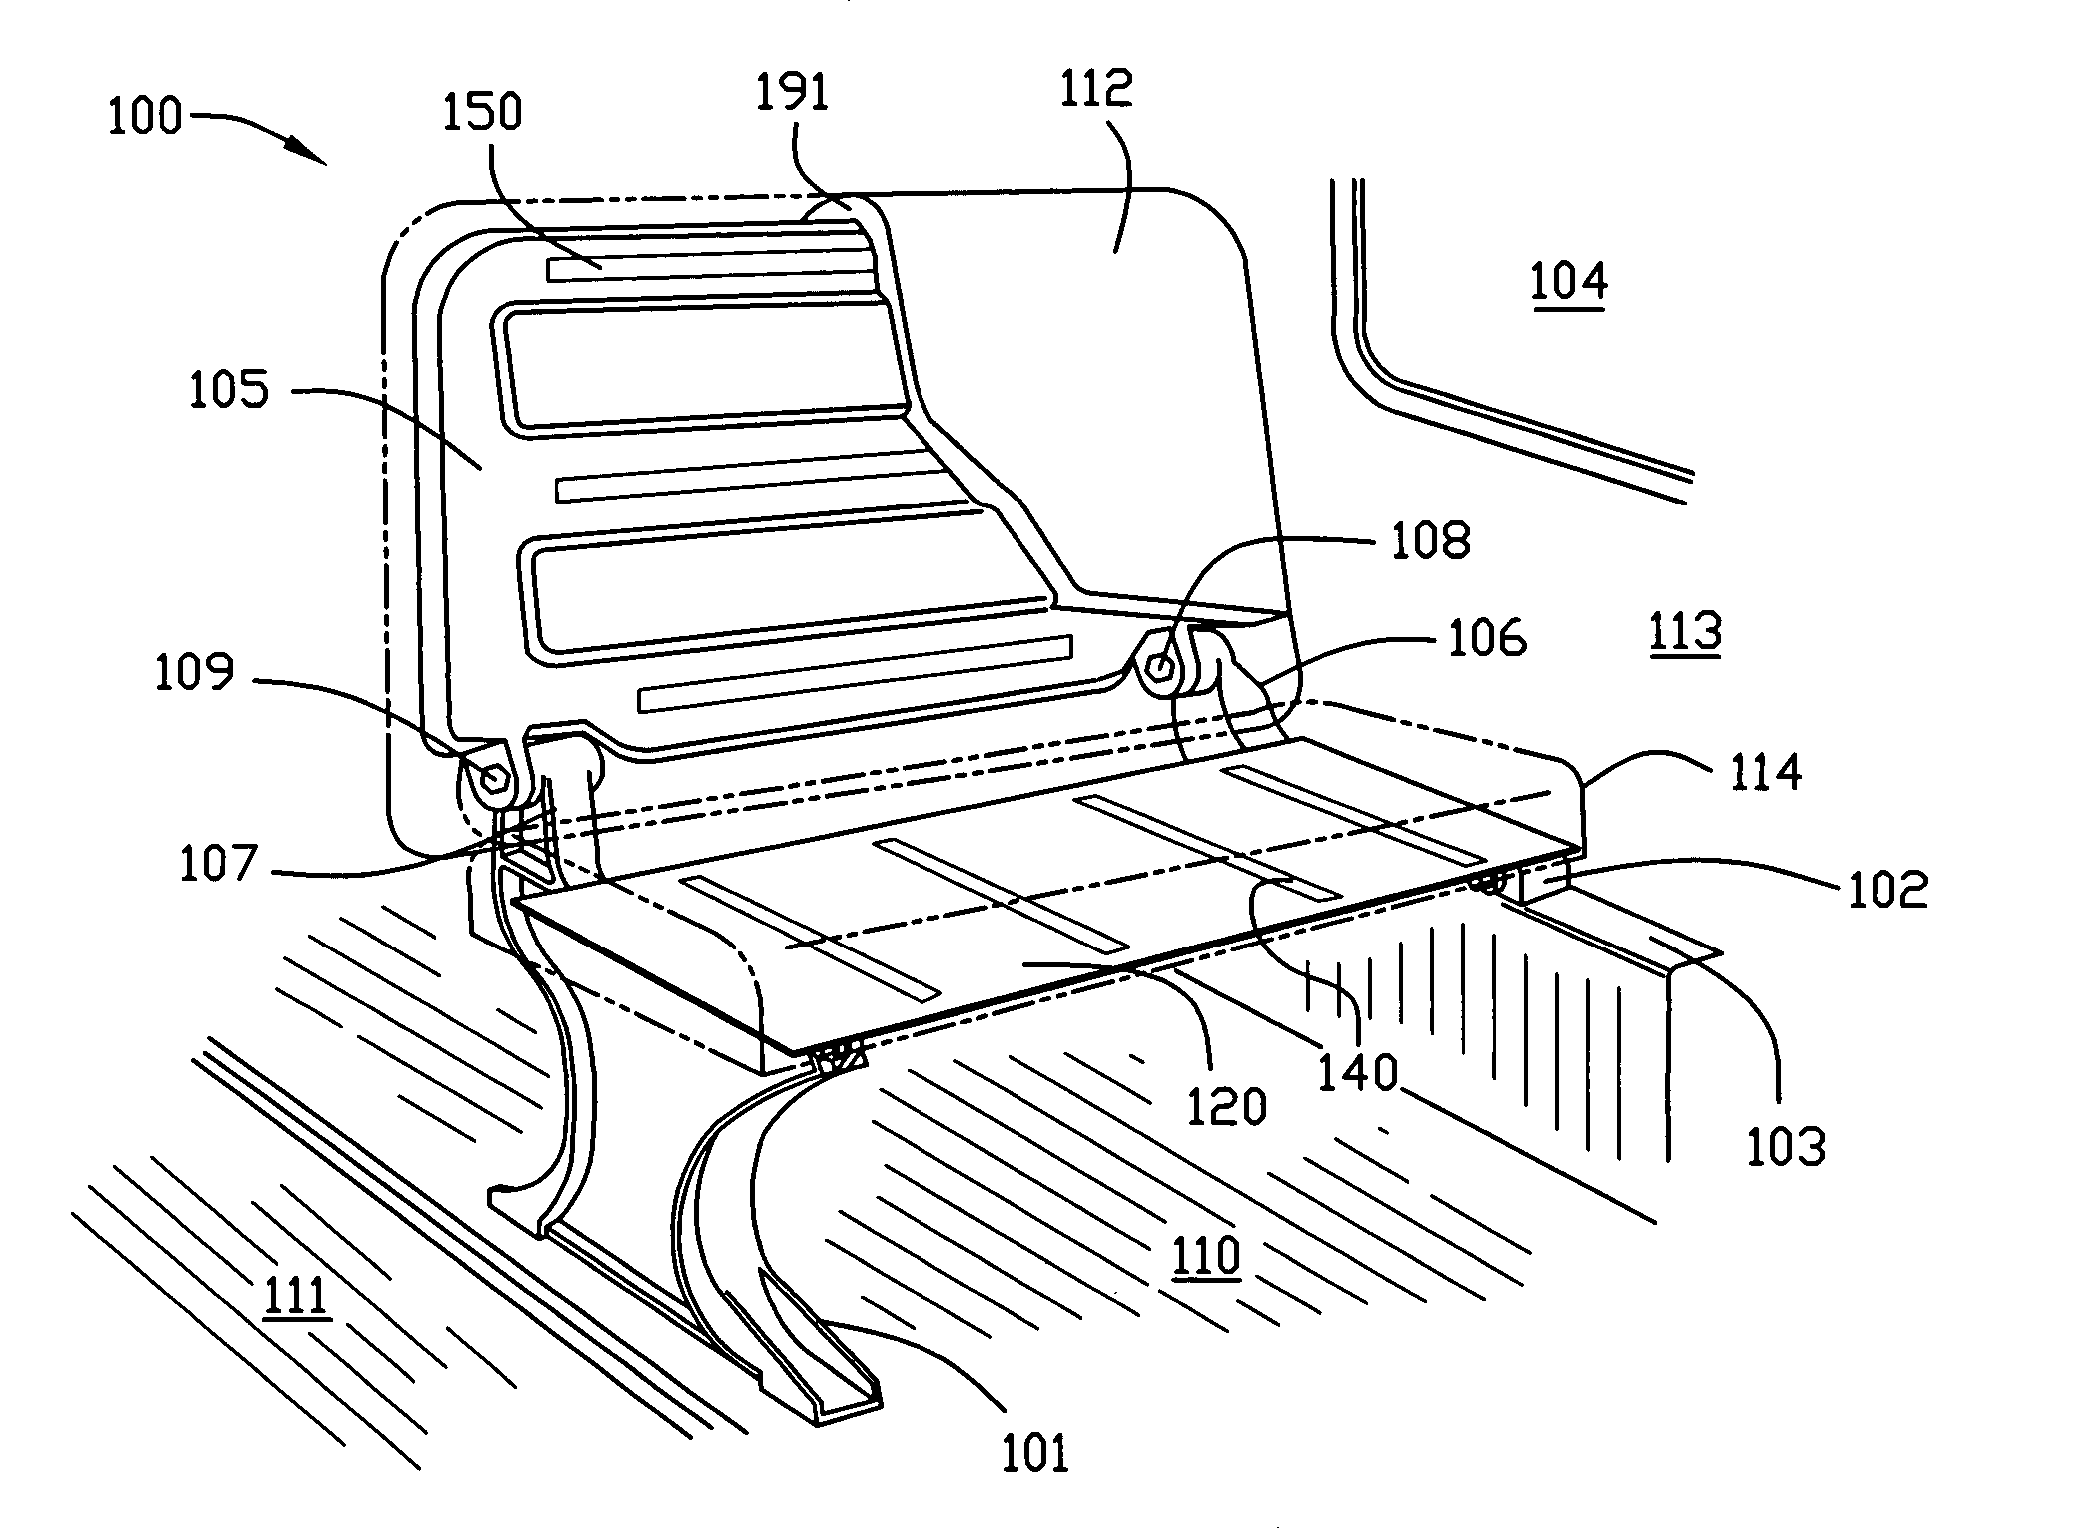 School bus seat with energy absorber